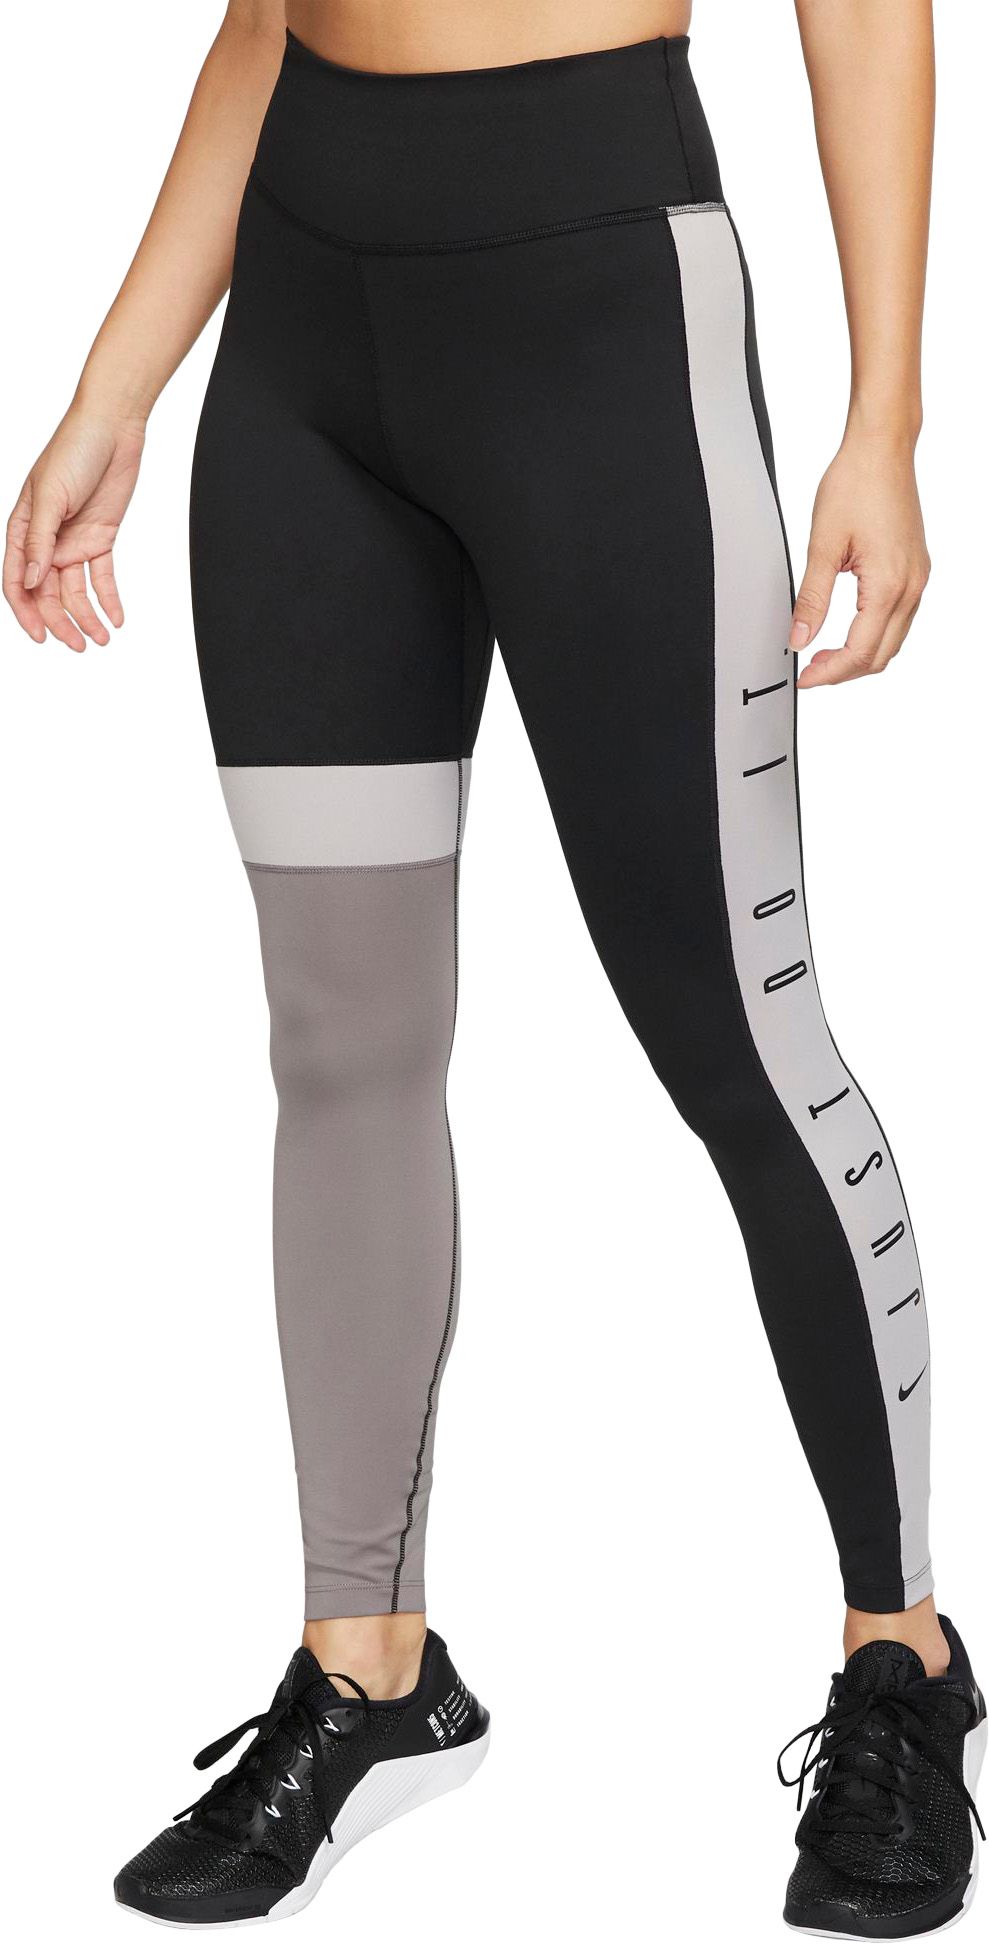 Nike One Women's 7/8 Colorblock Tights 